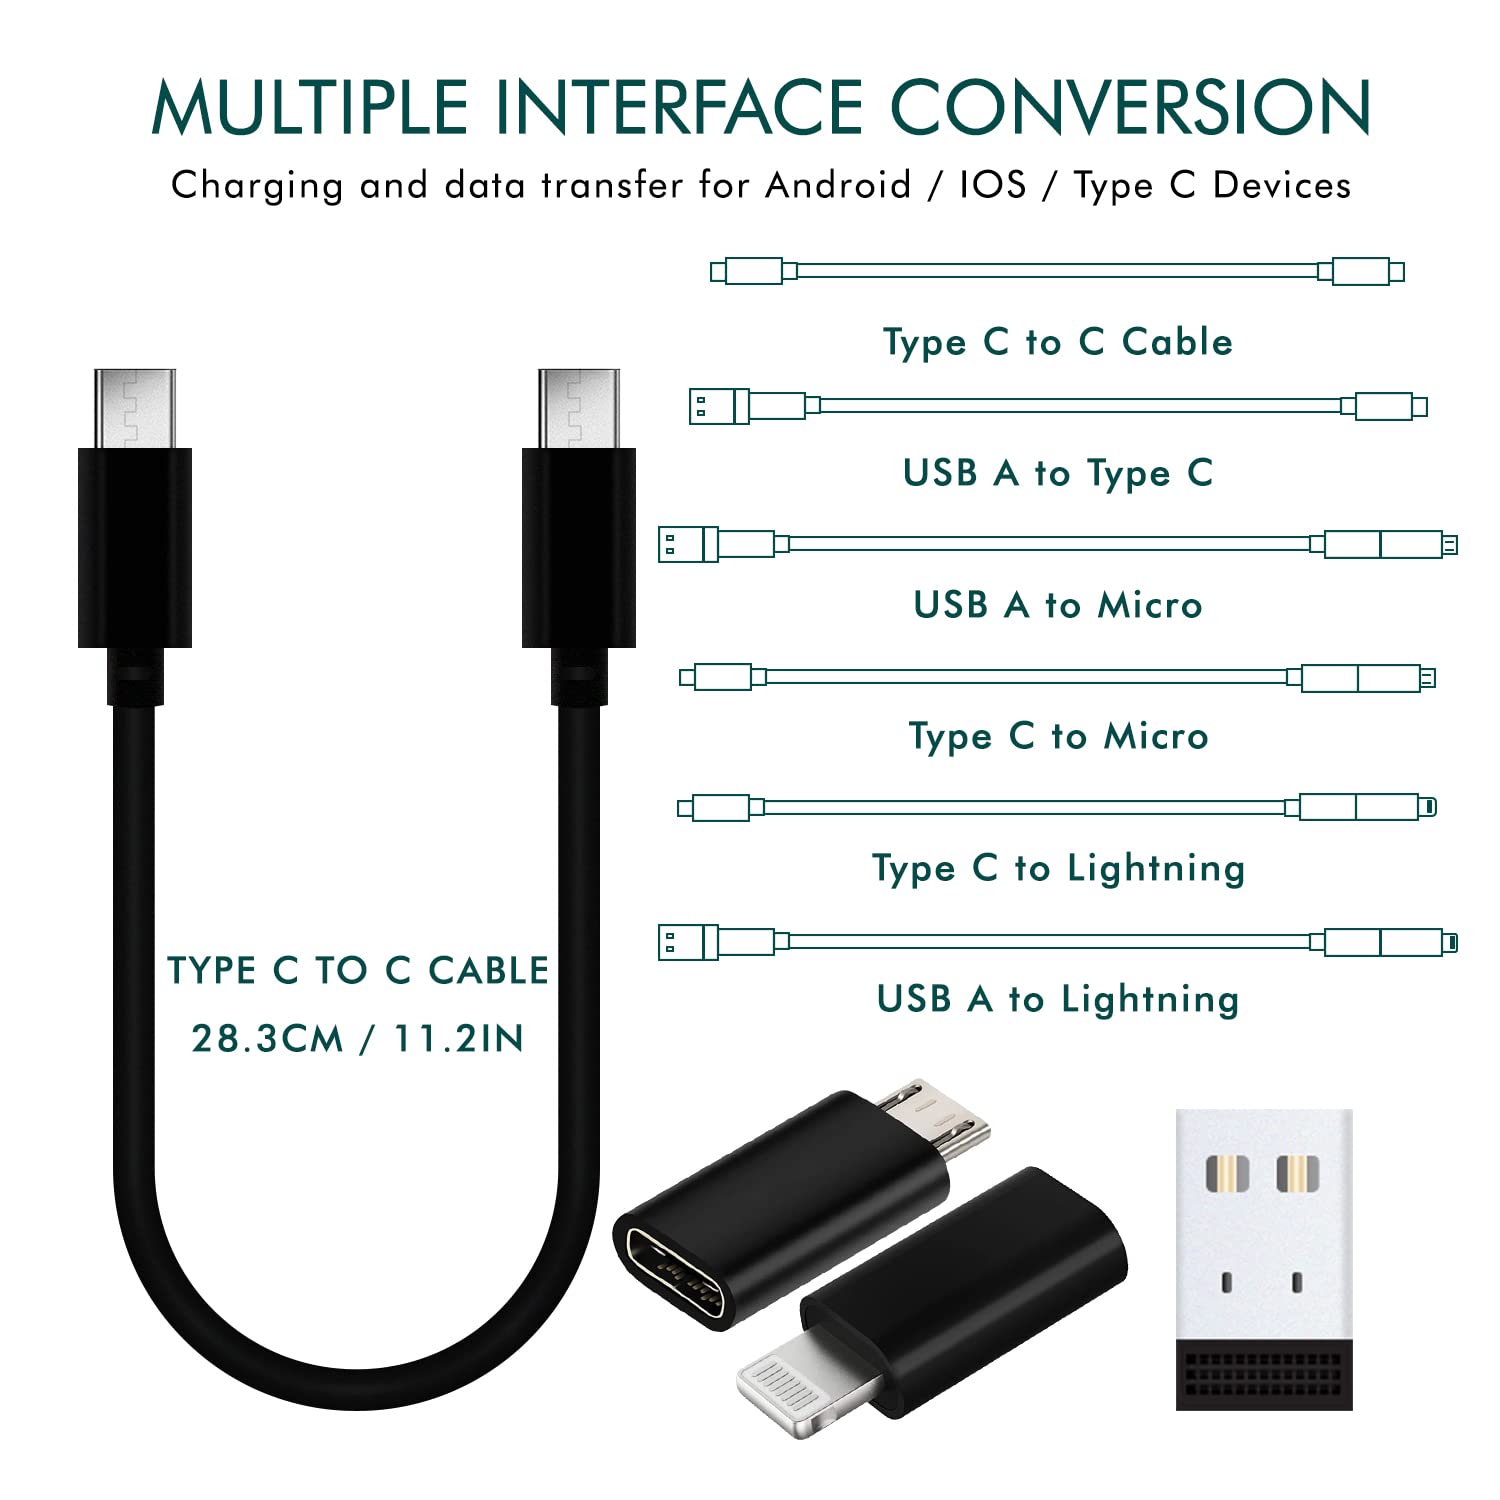 All In One 60W USB Fast Charging Travel Cable Set Type C, Lightening and Micro USB Port Inbuilt Mobile Stand Compatible with iPhone, iPad,Samsung,OnePlus, Mi,Oppo,Vivo,iQOO (All in 1, Black)